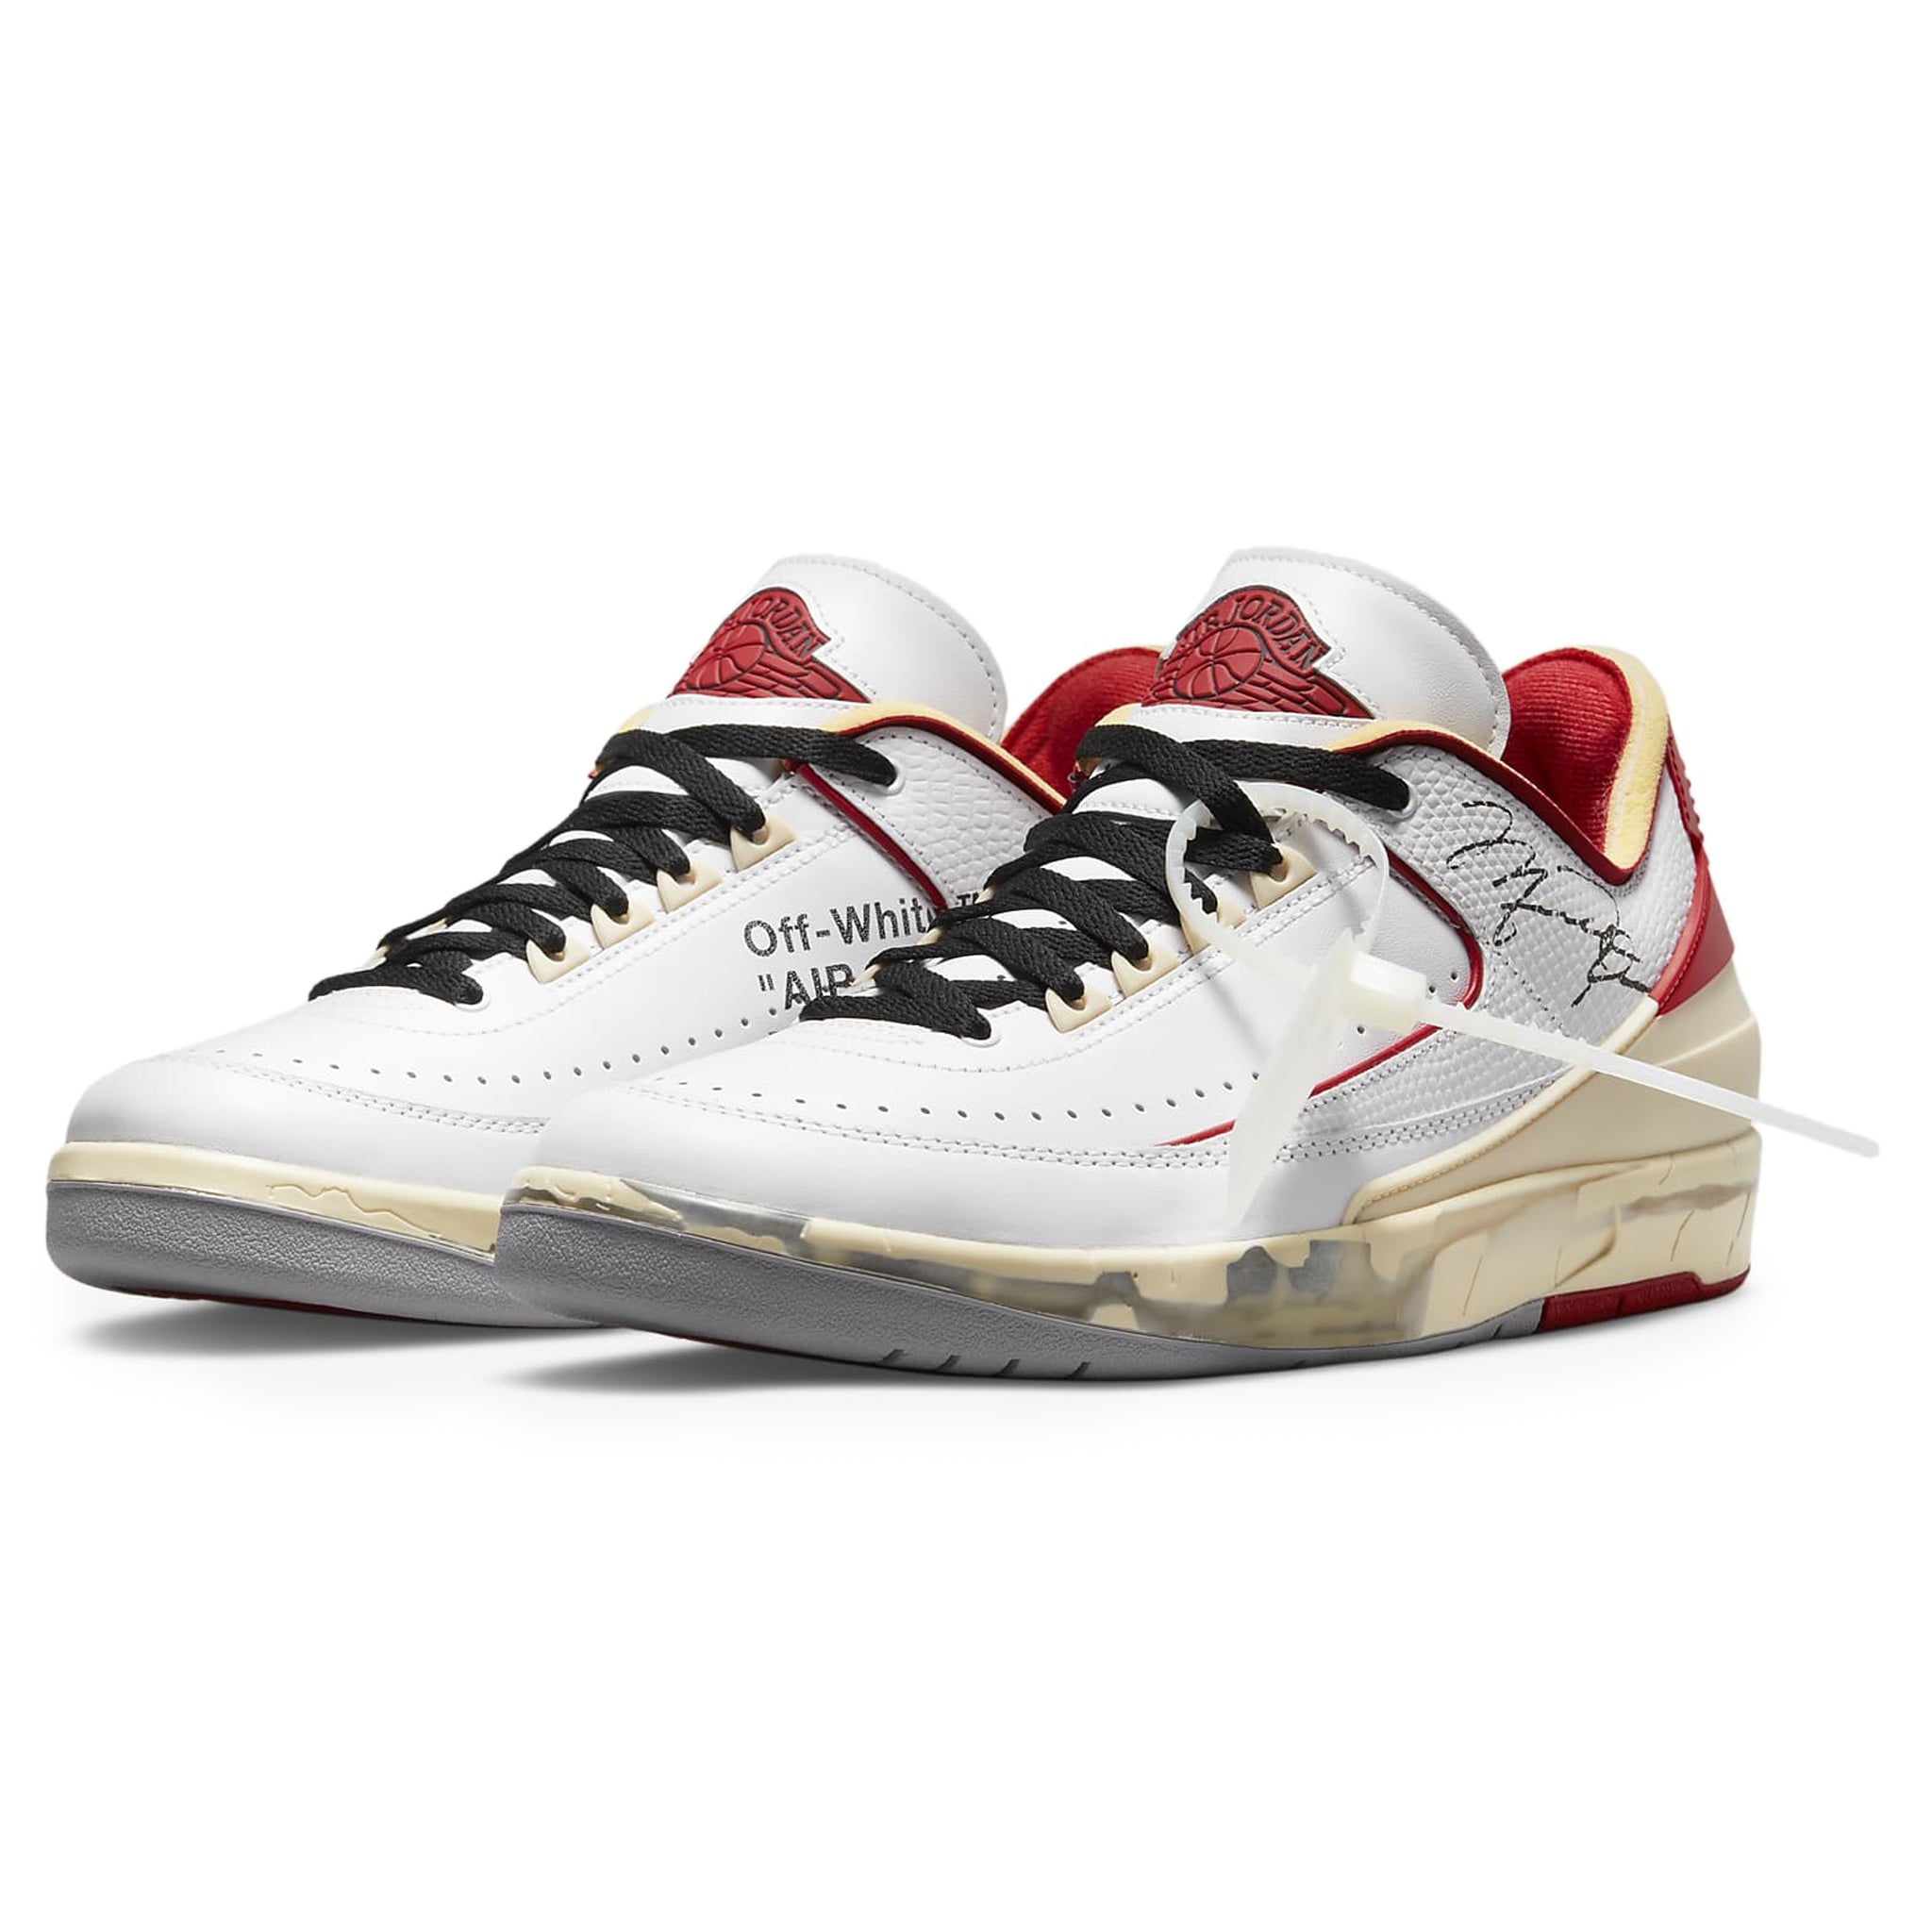 Front side view of Air Jordan 2 X Off-White Retro Low White Varsity Red DJ4375-106